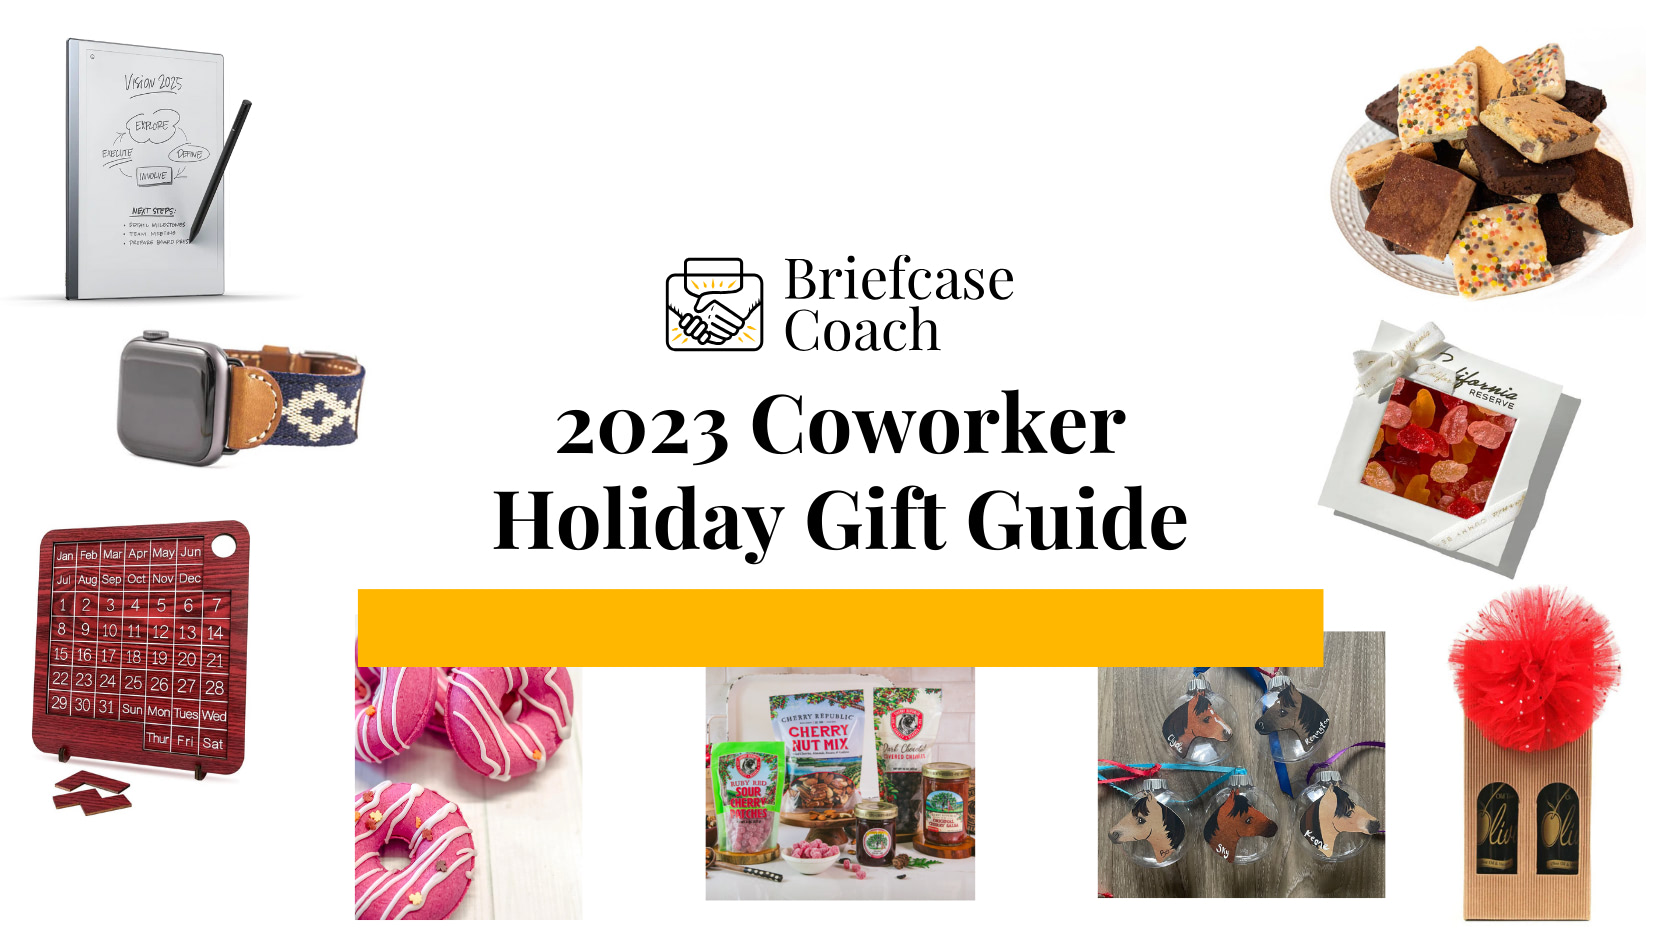 2023 Coworker Holiday Gift Guide